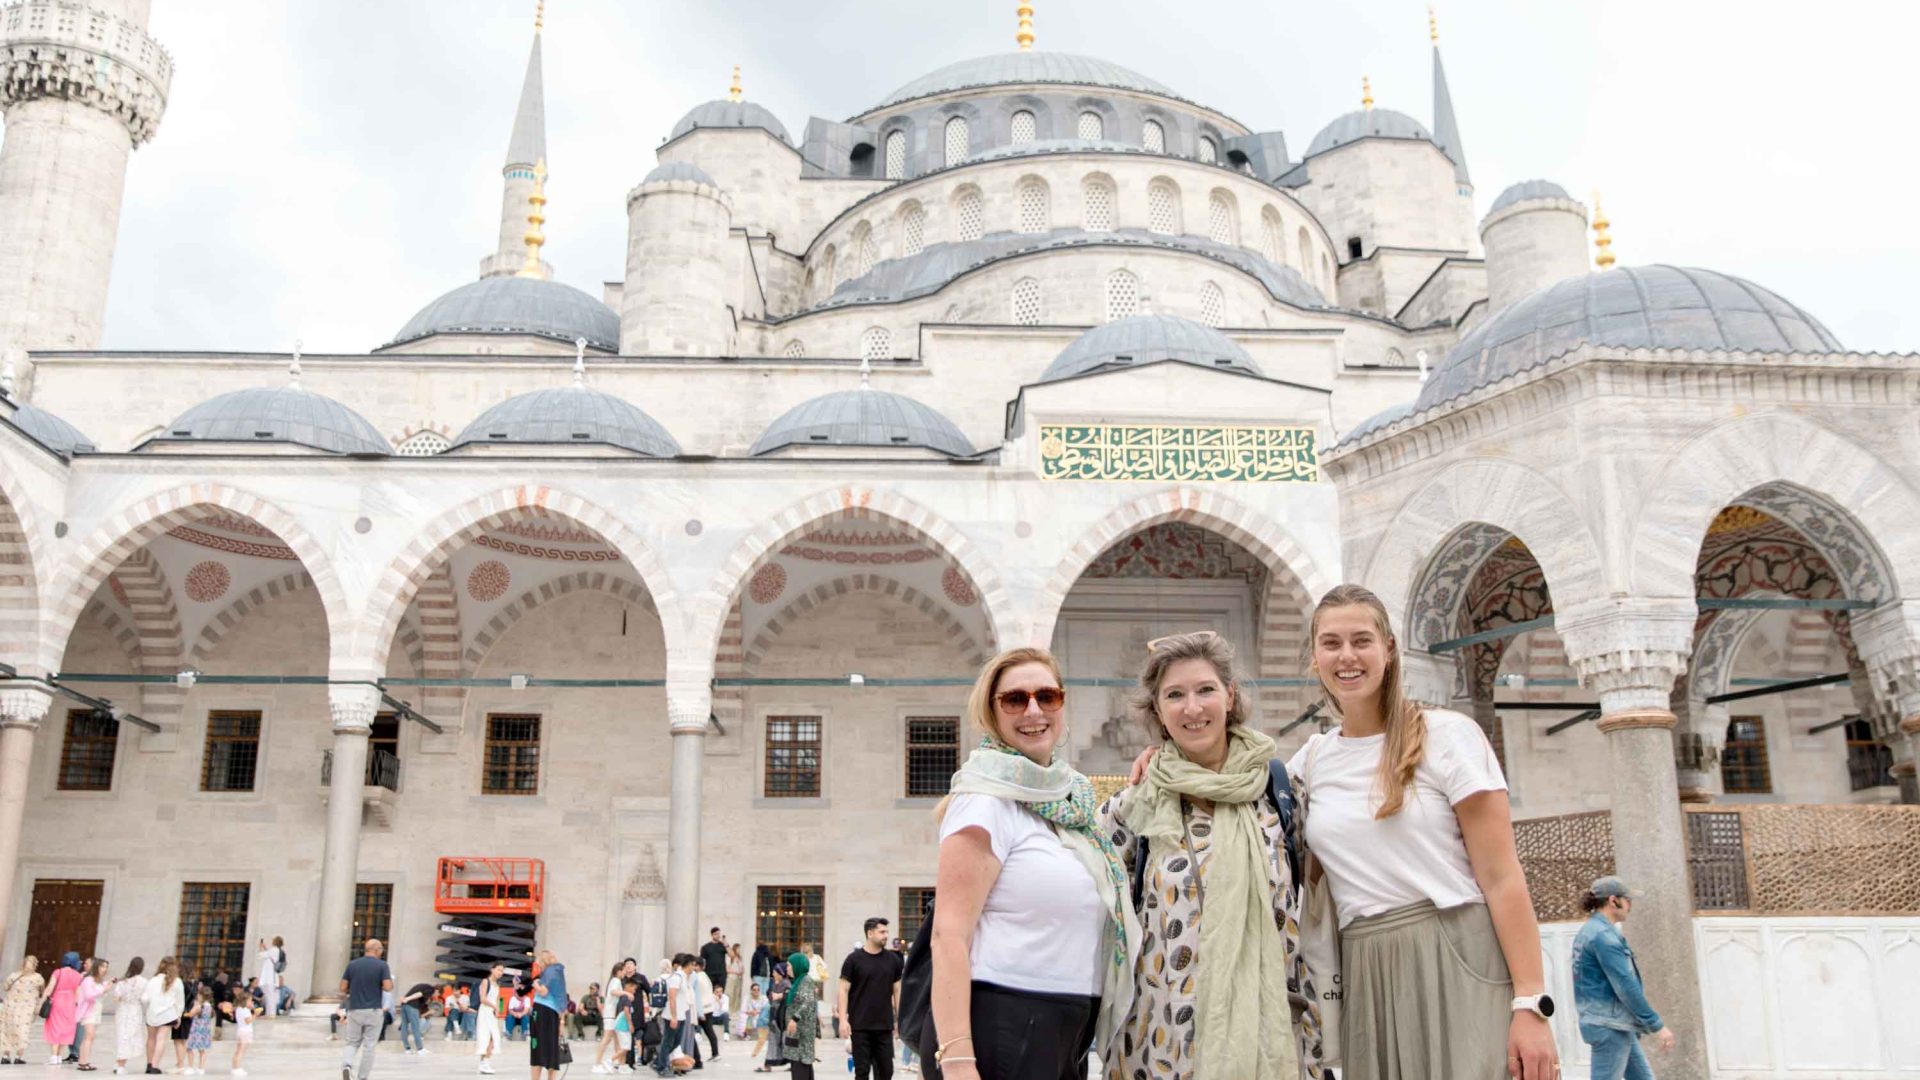 Travelers at the Blue Mosque, Turkey.